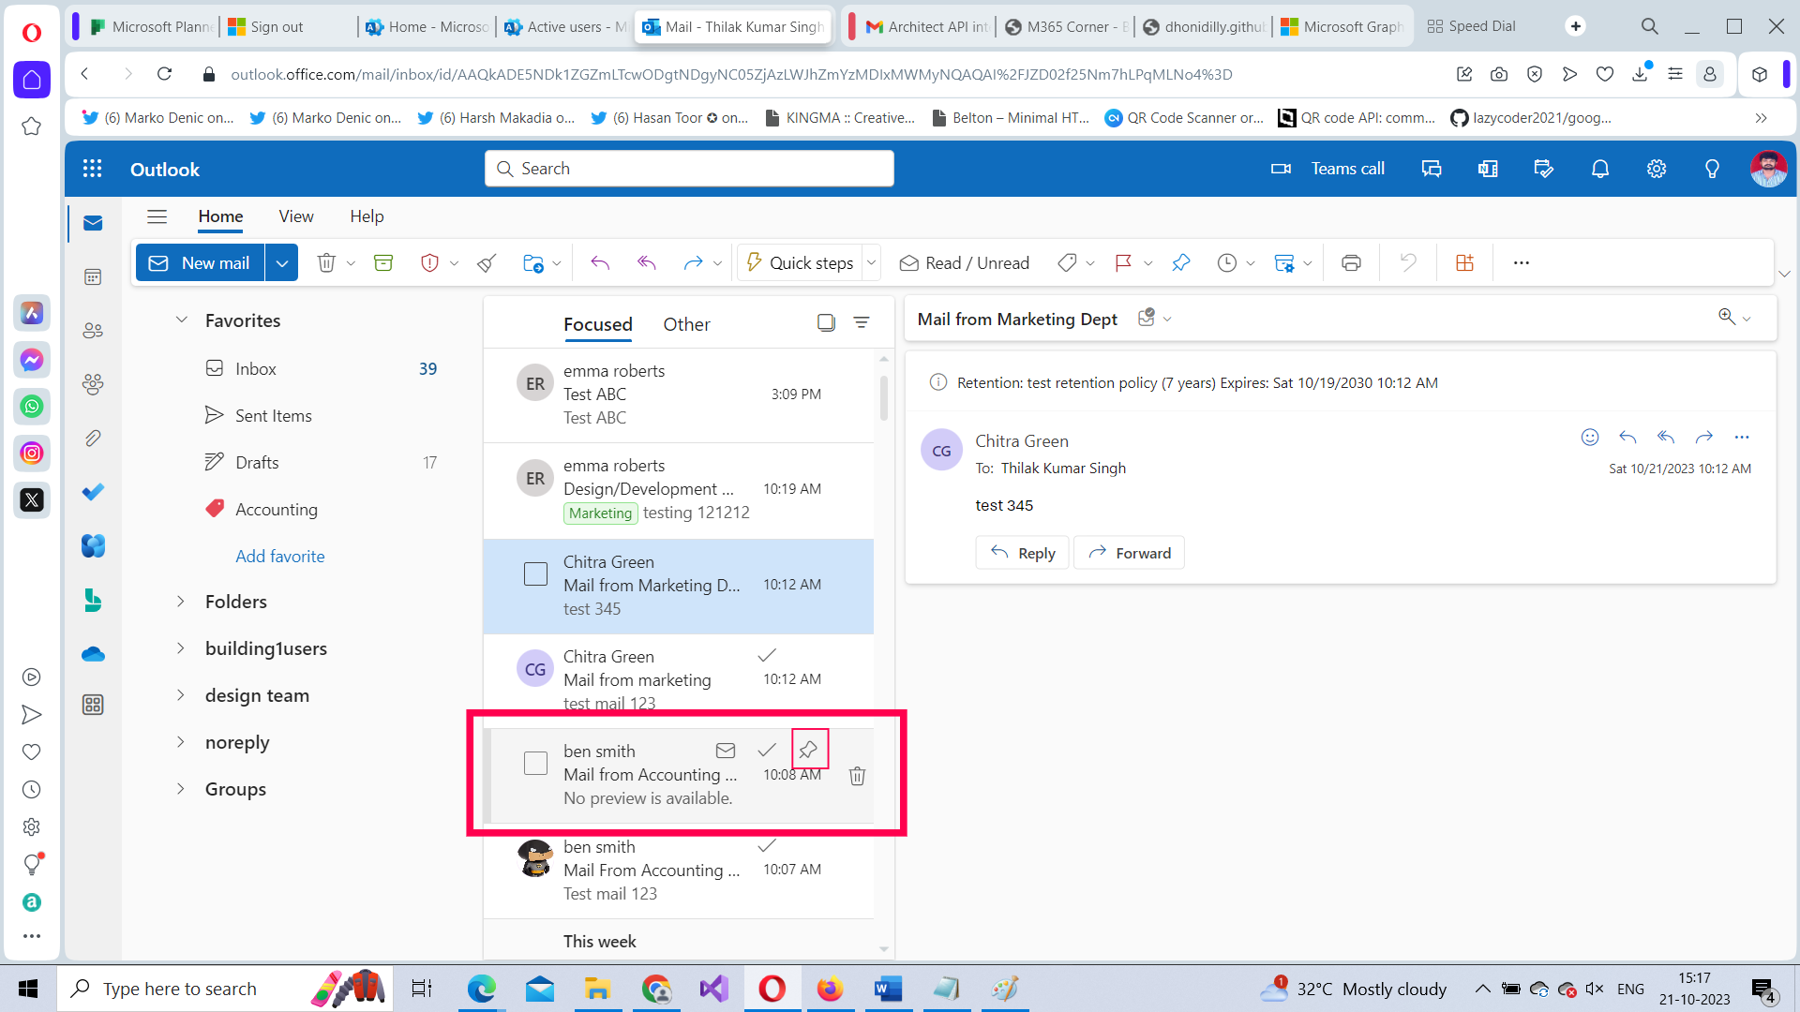 This screenshot shows how you can pin an email by selecting the pin icon, which appears when you hover over an email in Microsoft 365 Outlook on the web.